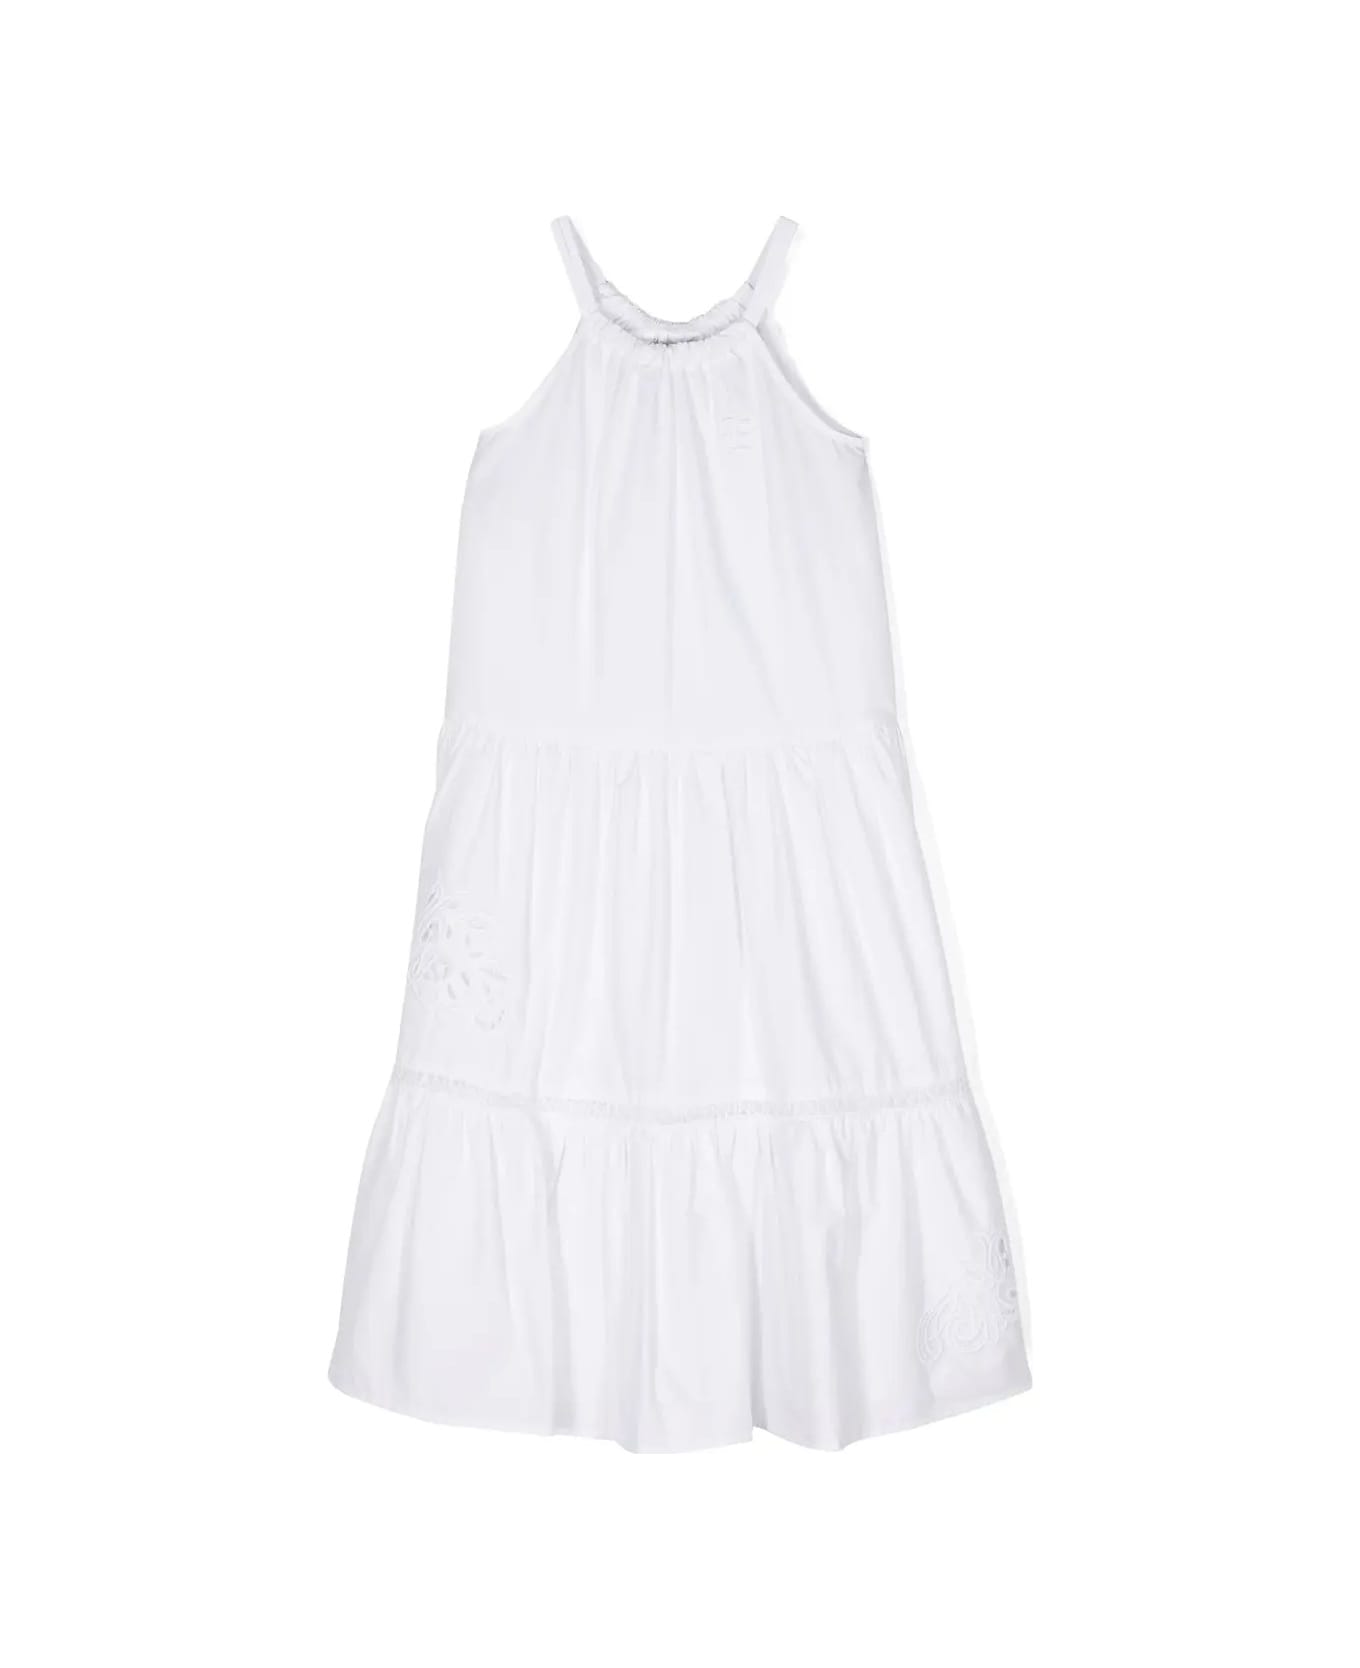 Ermanno Scervino Junior Sleeveless White Flounced Dress With Lace - White